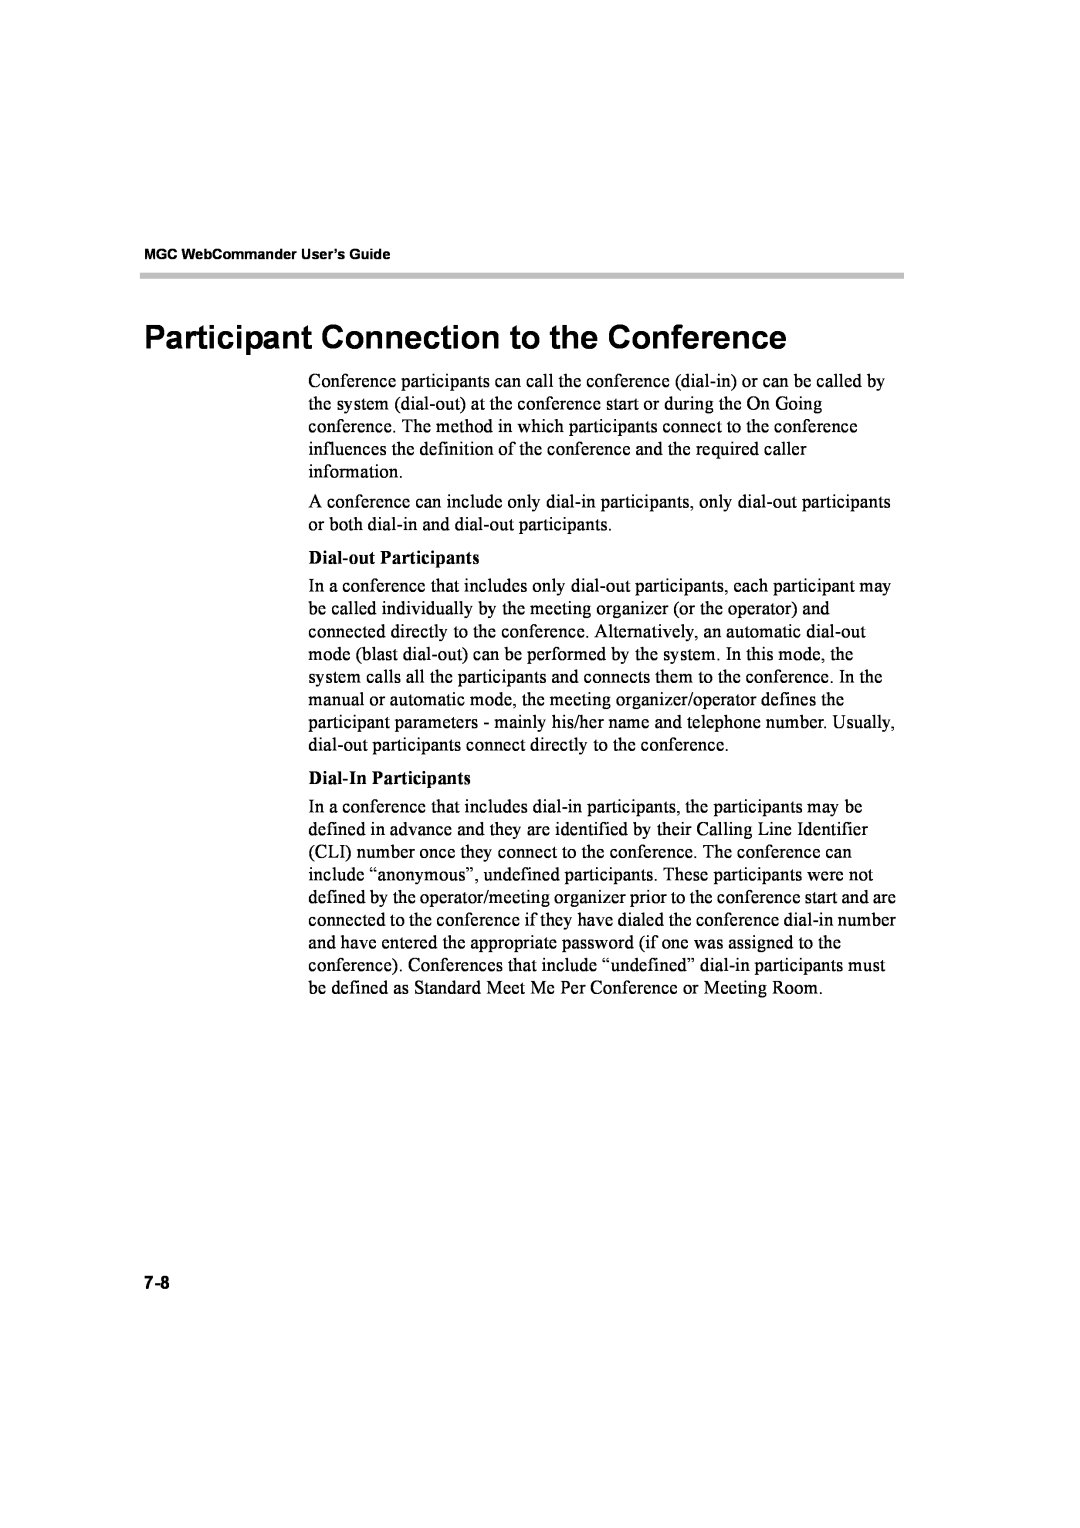 Polycom 8 manual Participant Connection to the Conference, Dial-outParticipants, Dial-InParticipants 